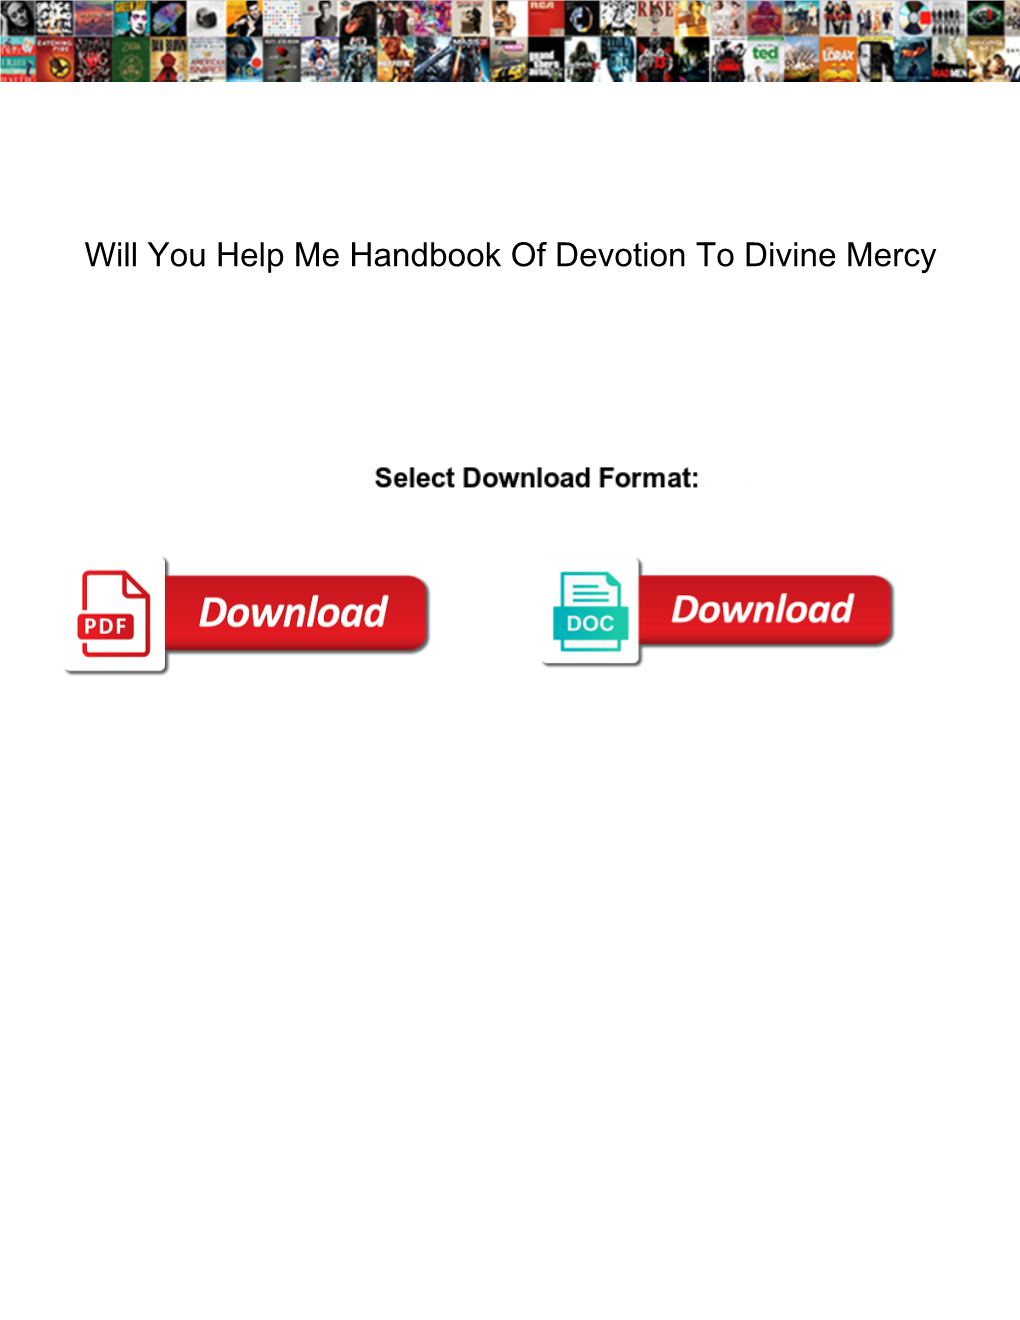 Will You Help Me Handbook of Devotion to Divine Mercy